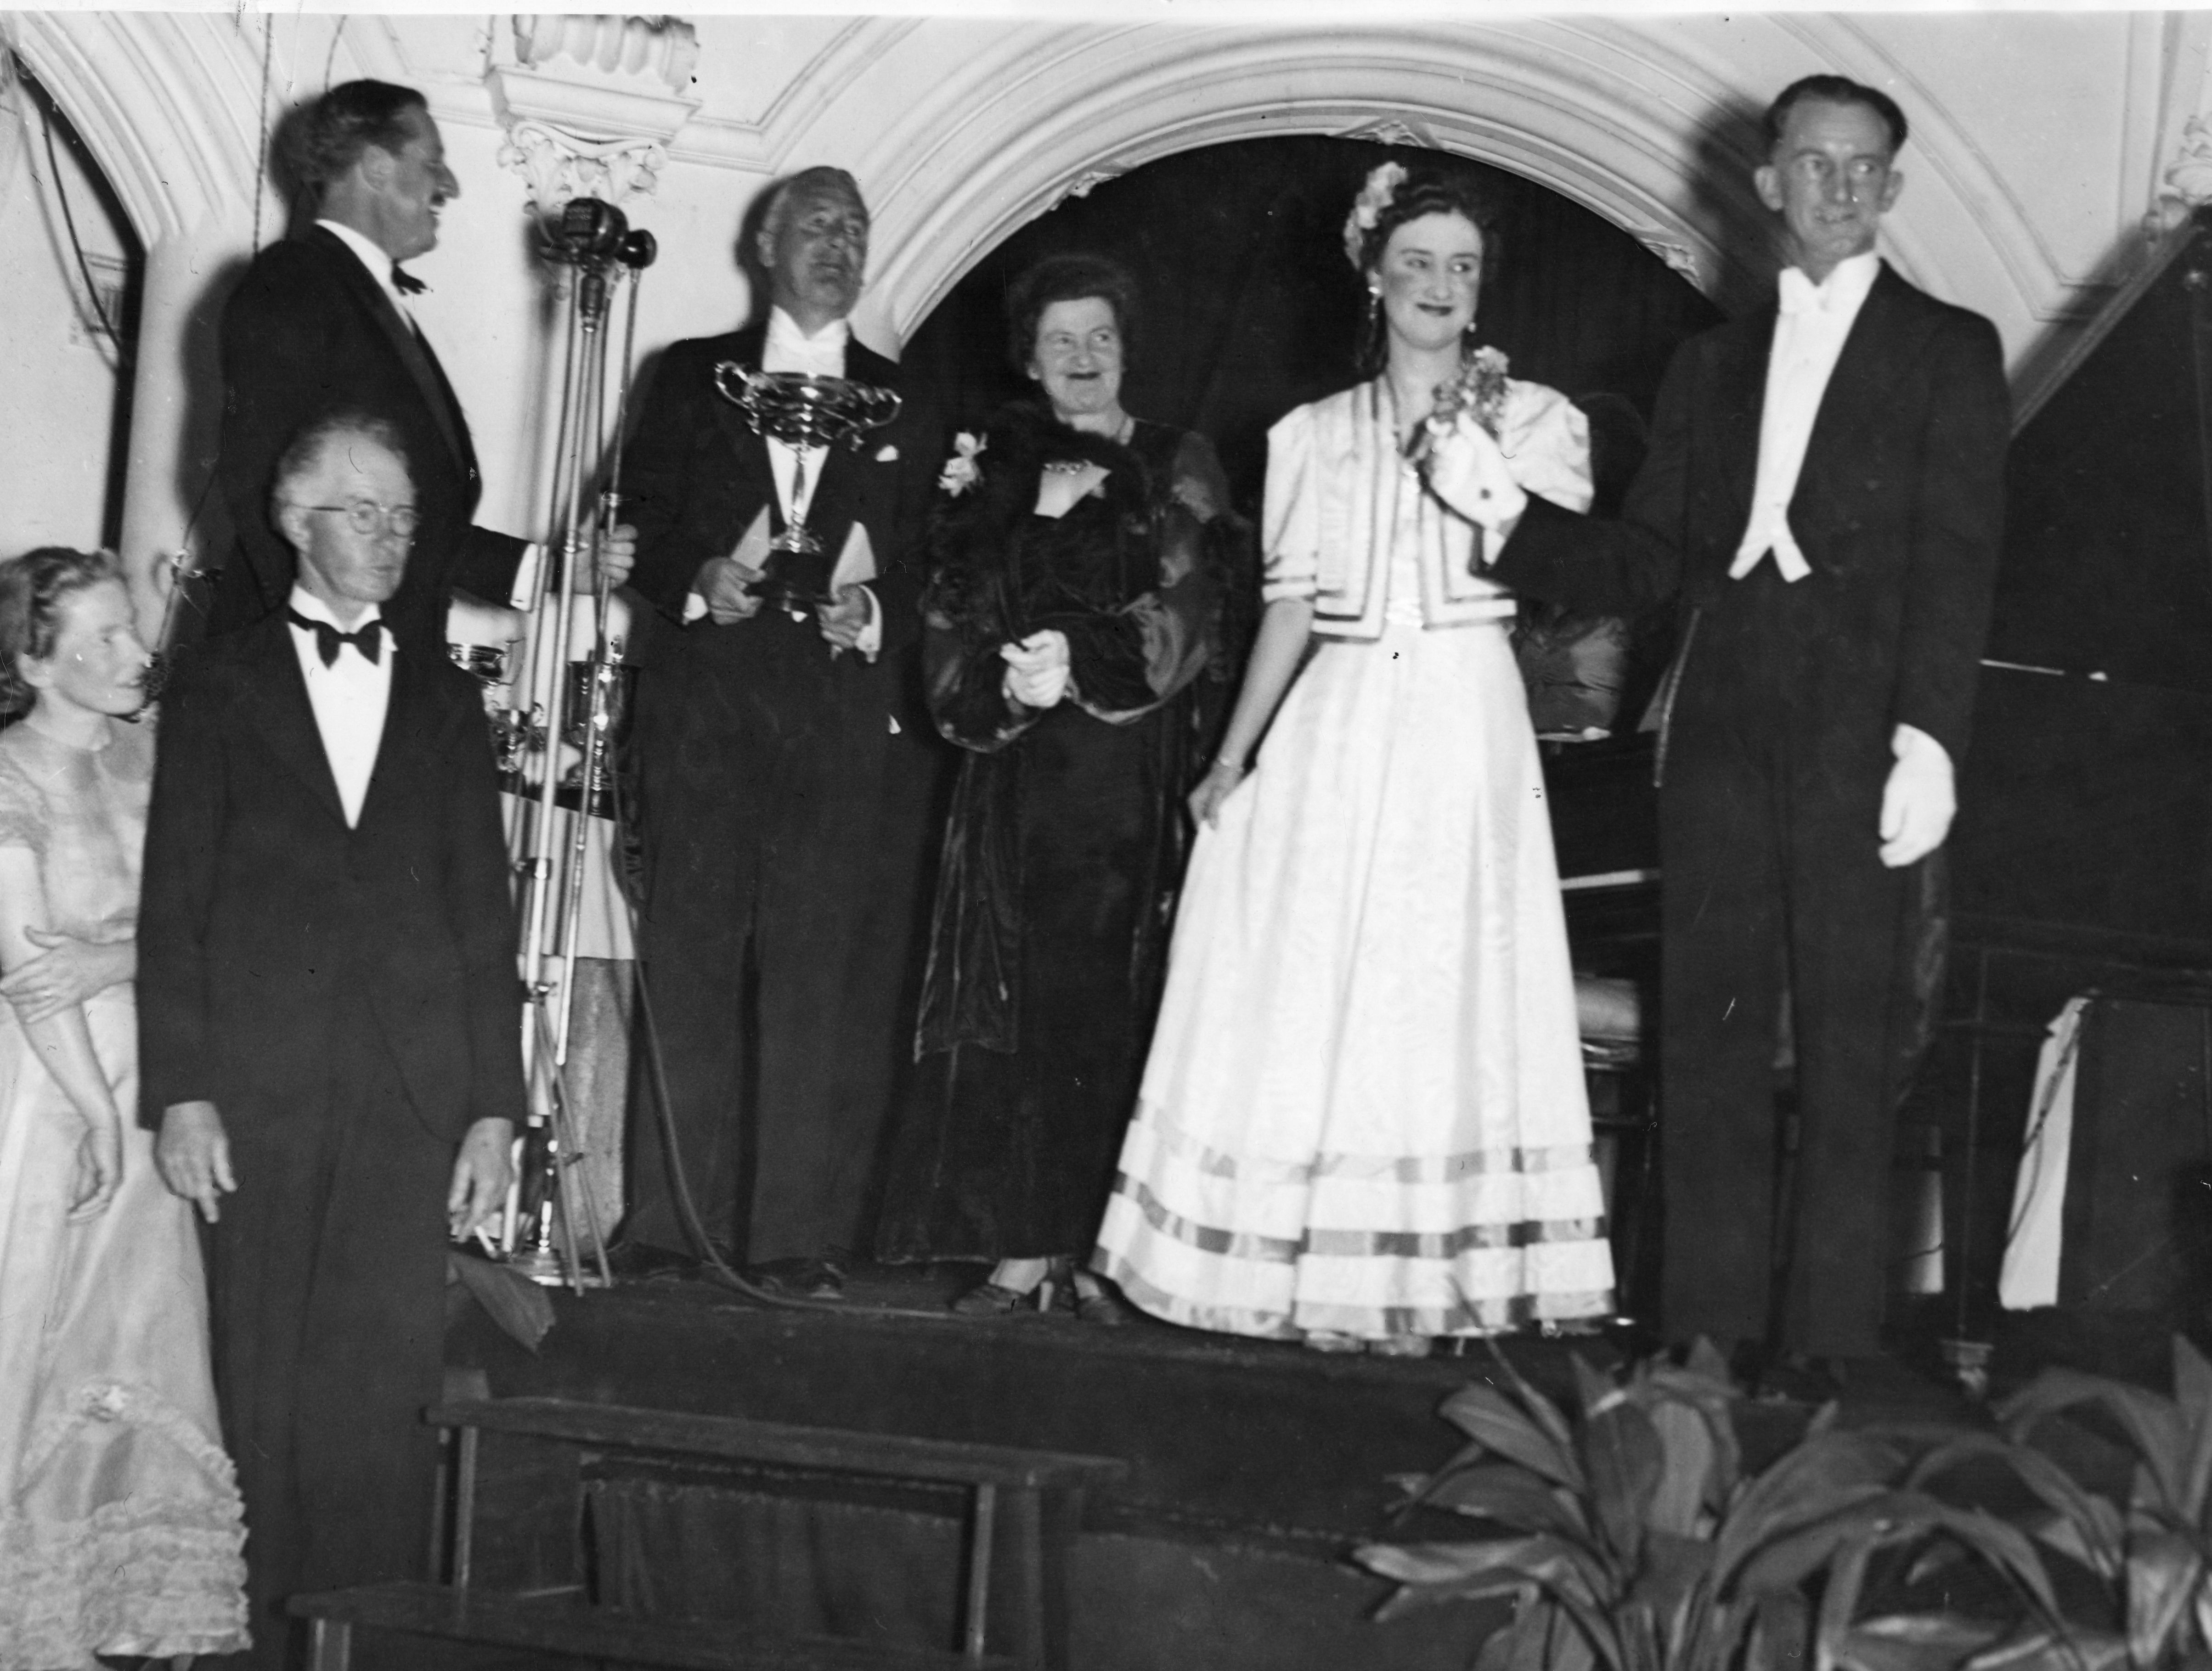 Black and white photo of couple in evening wear presenting a trophy to a man and a woman in evening wear.